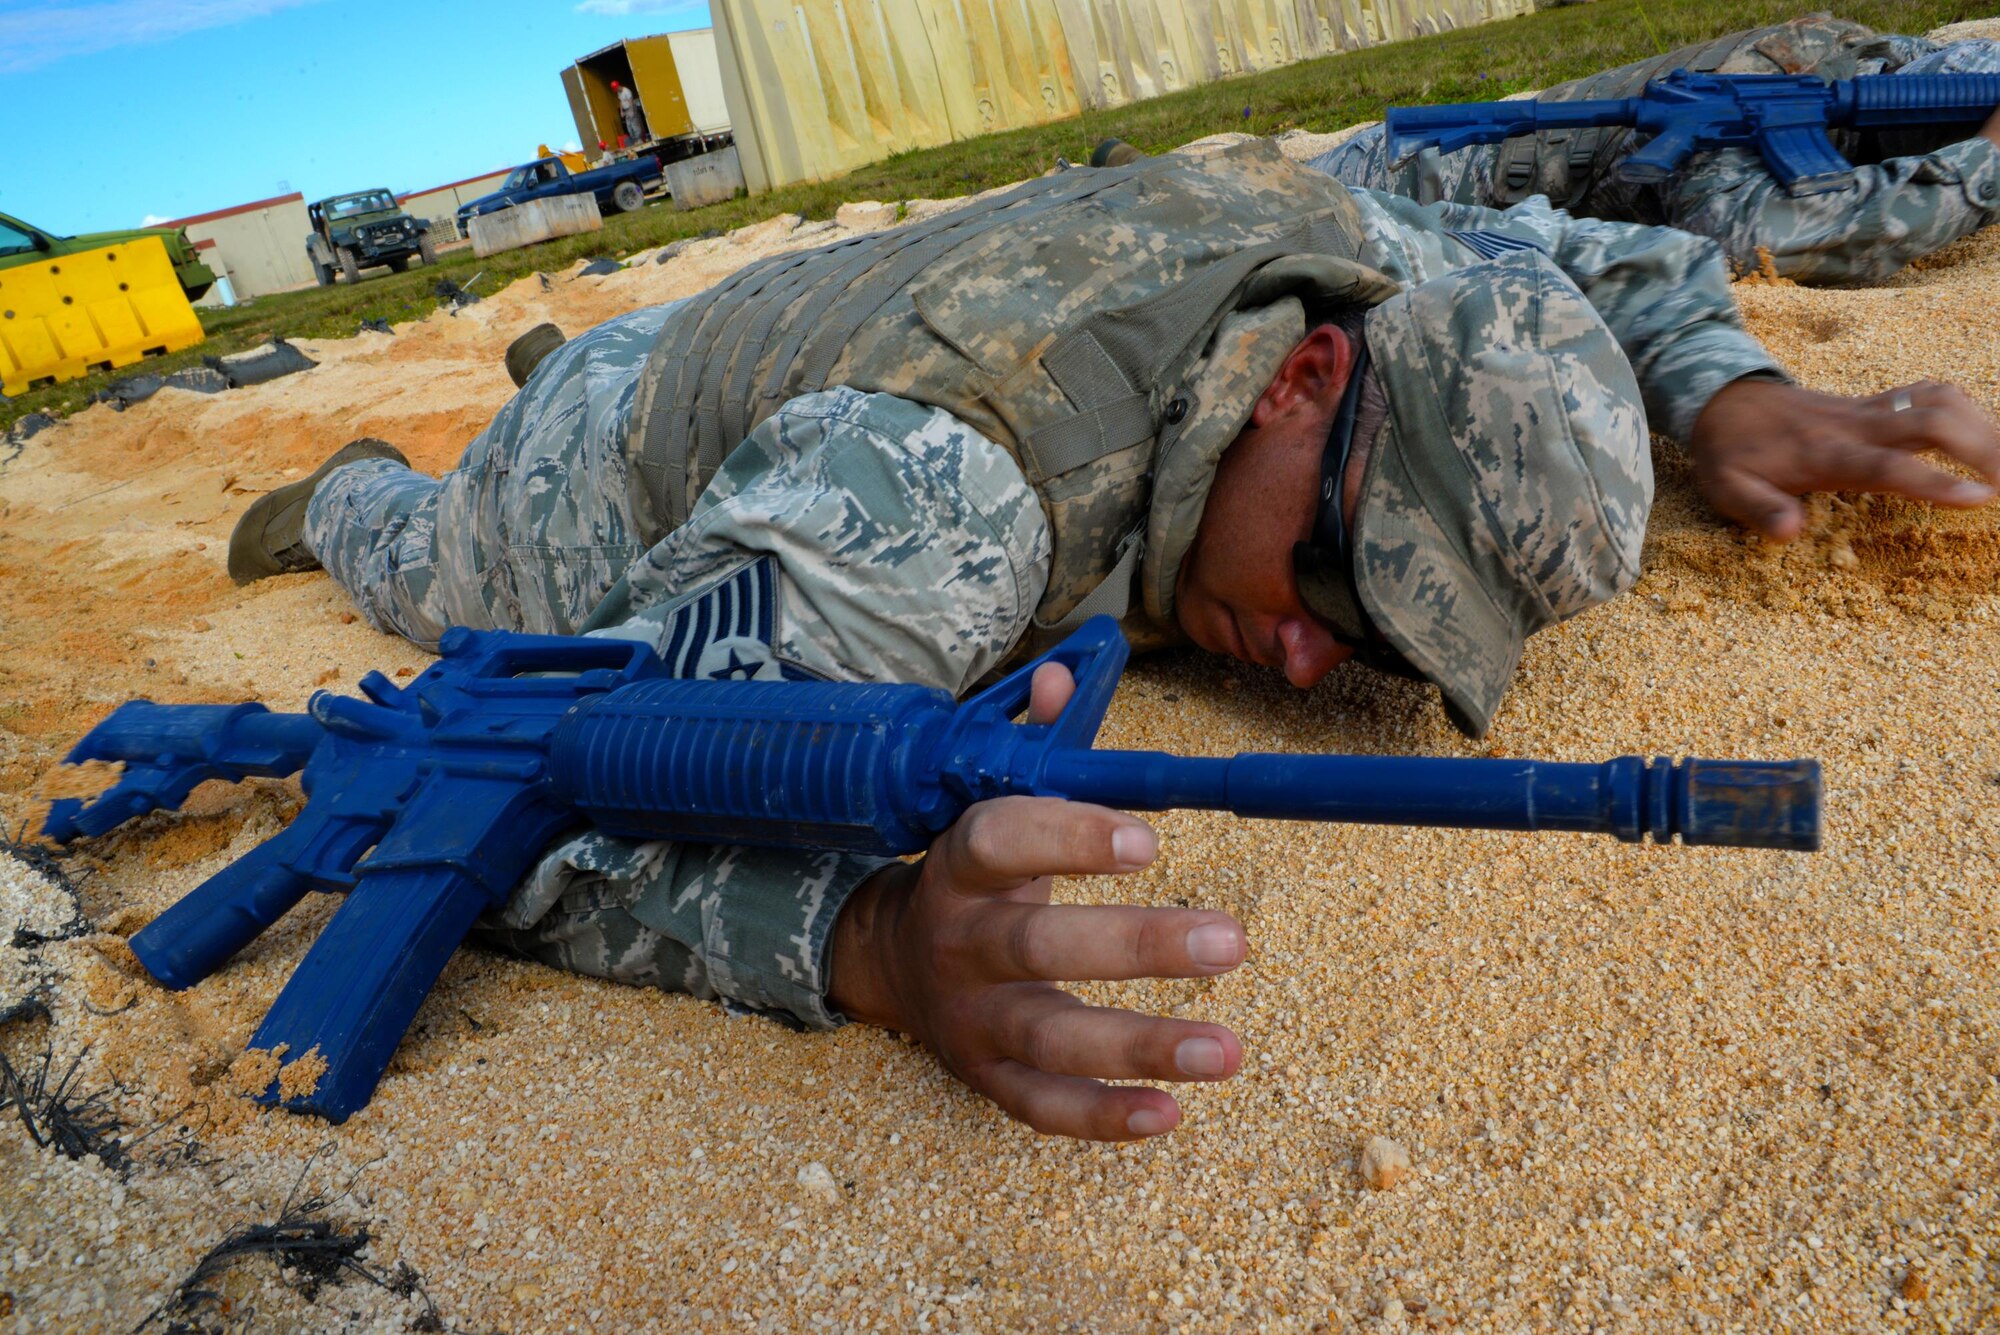 Tech. Sgt. Robert Alsup, 36th Civil Engineer Squadron  horizontal repair NCO in charge, practices a low crawl during a Prime Base Engineer Emergency Force exercise March 24, 2016, at Andersen Air Force Base, Guam. The main exercise objective was to develop and maintain a highly skilled, agile military combat support force capable of rapid response in support of worldwide contingency operations. (U.S. Air Force Photo/Airman 1st Class Alexa Ann Henderson)